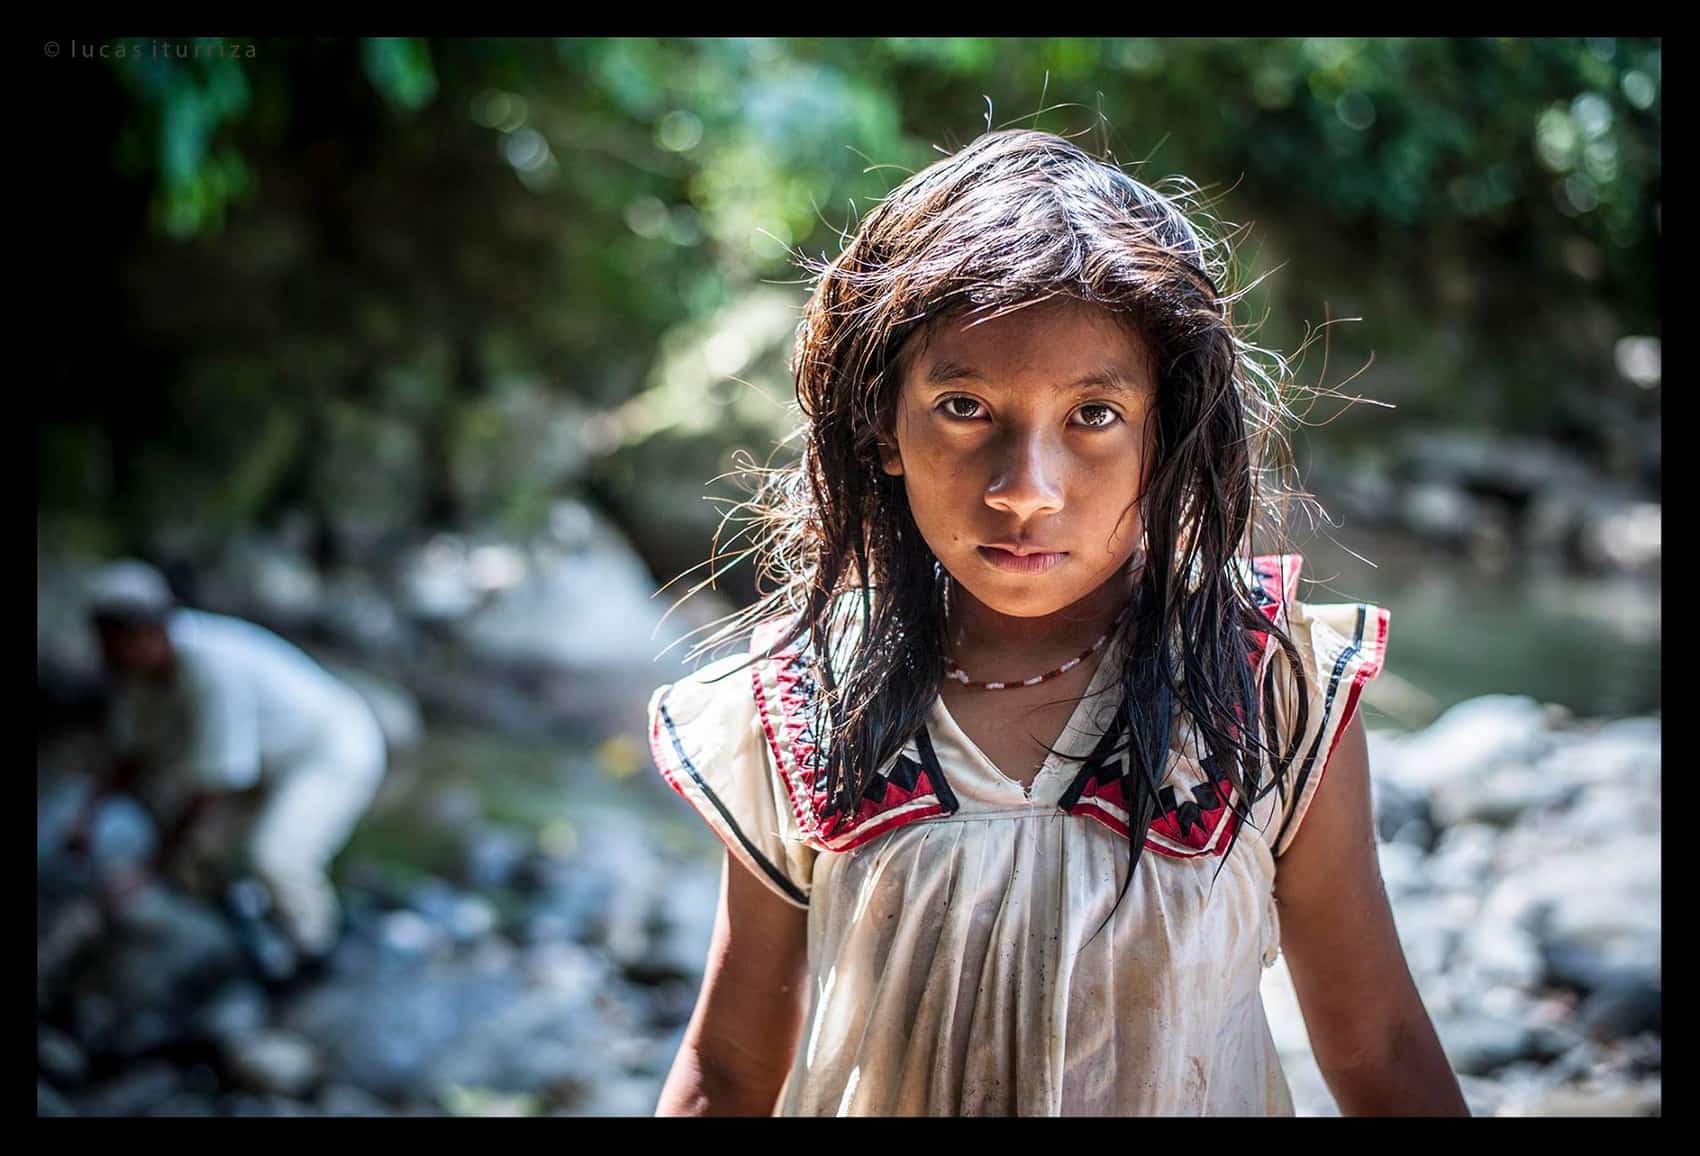 A portrait photo of a Costa Rican girl.